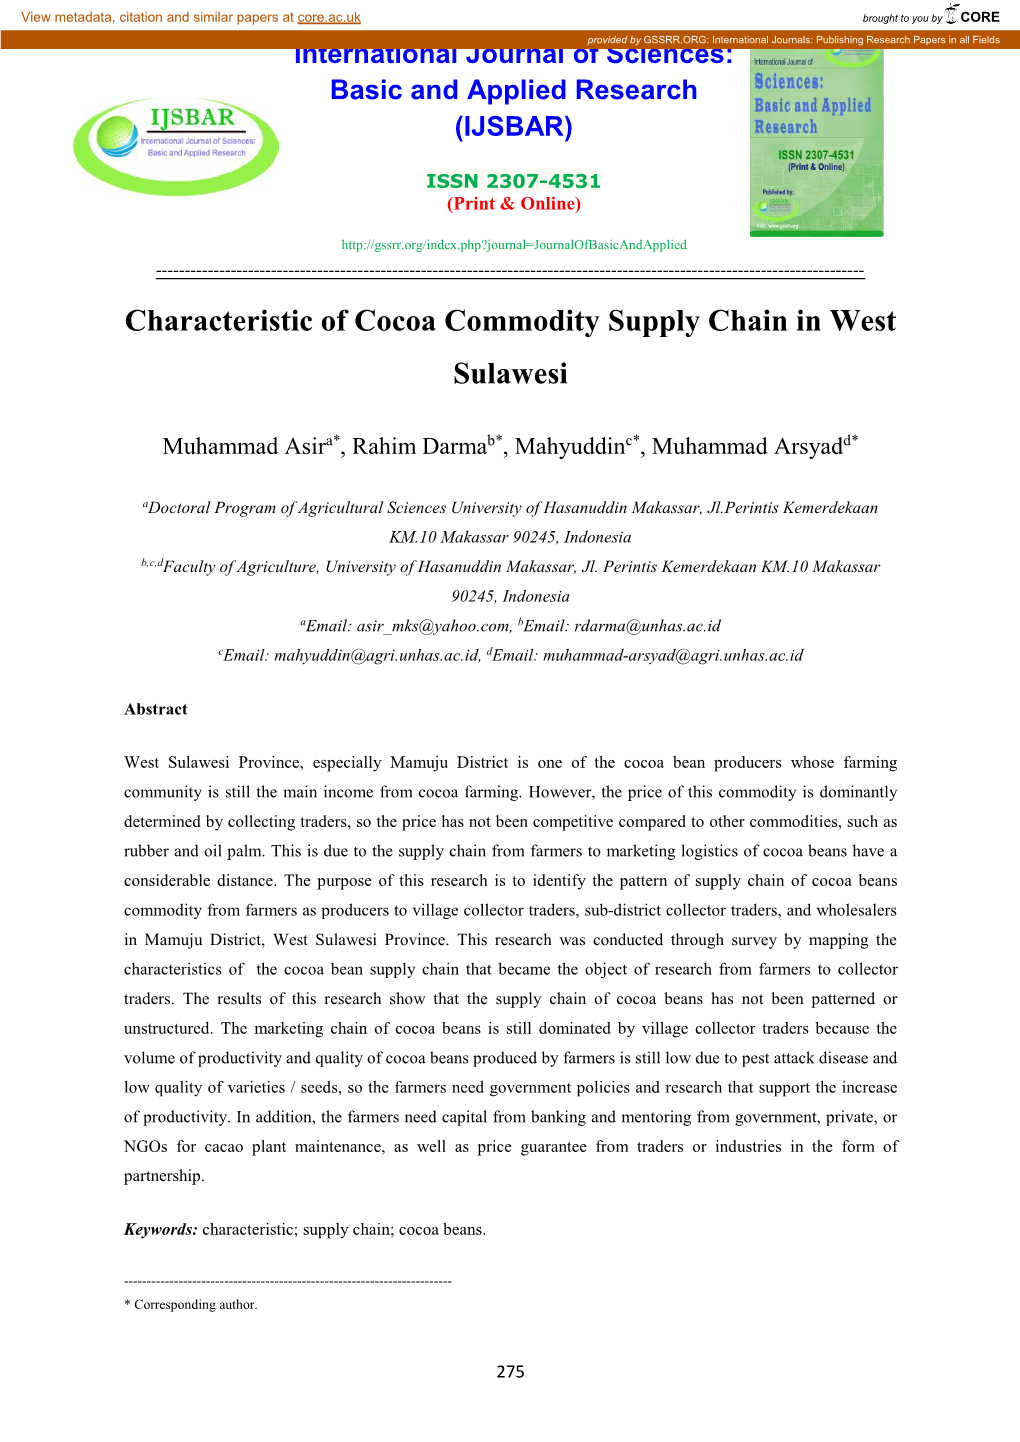 Characteristic of Cocoa Commodity Supply Chain in West Sulawesi